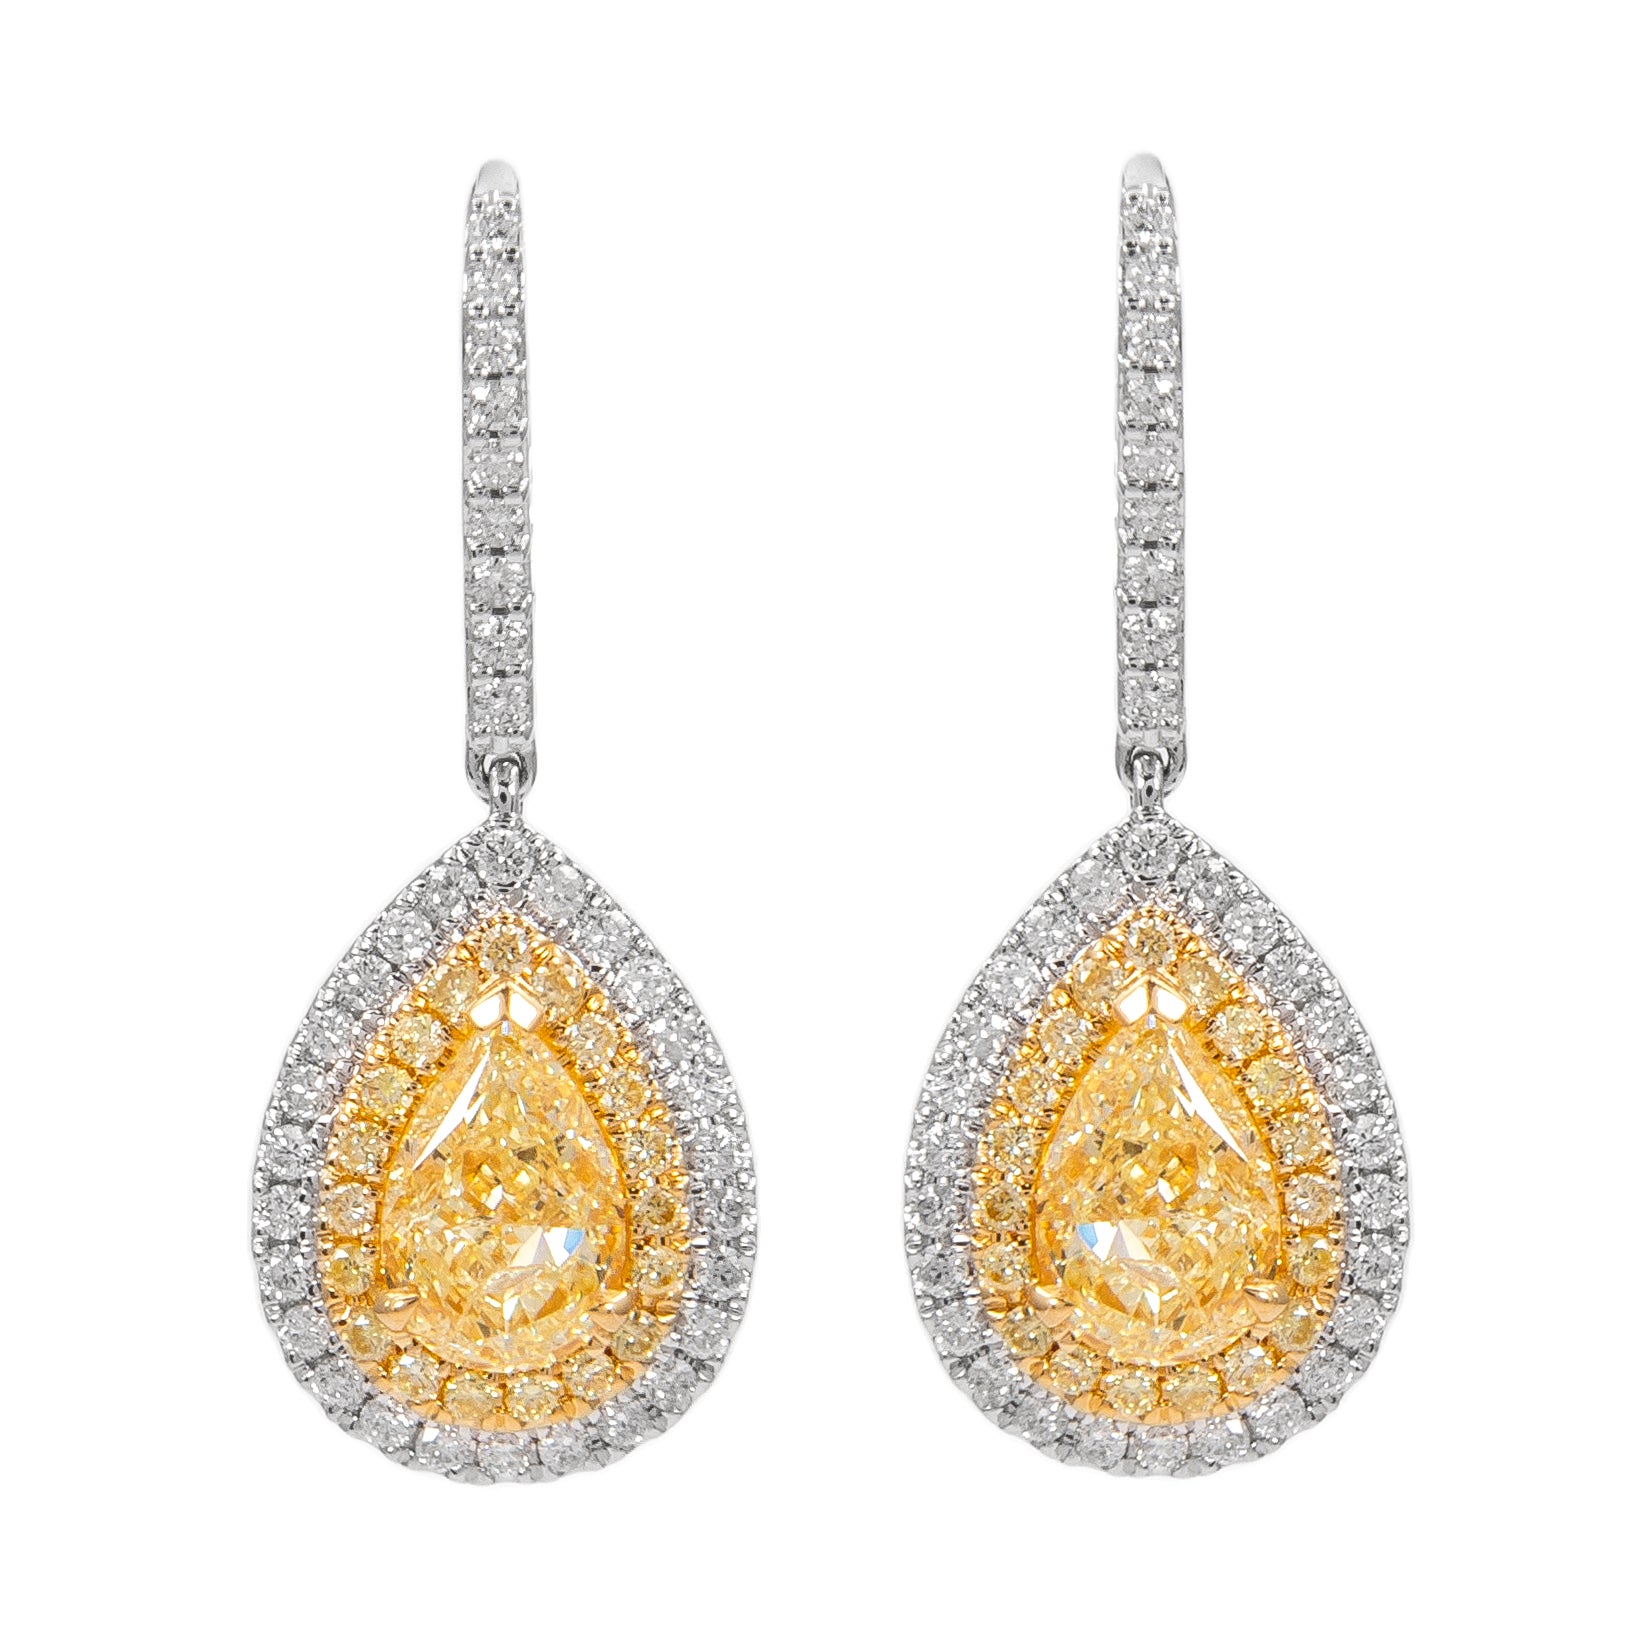 Alexander 2.74ctt Yellow Diamond with Halo Drop Earrings 18k Gold For Sale